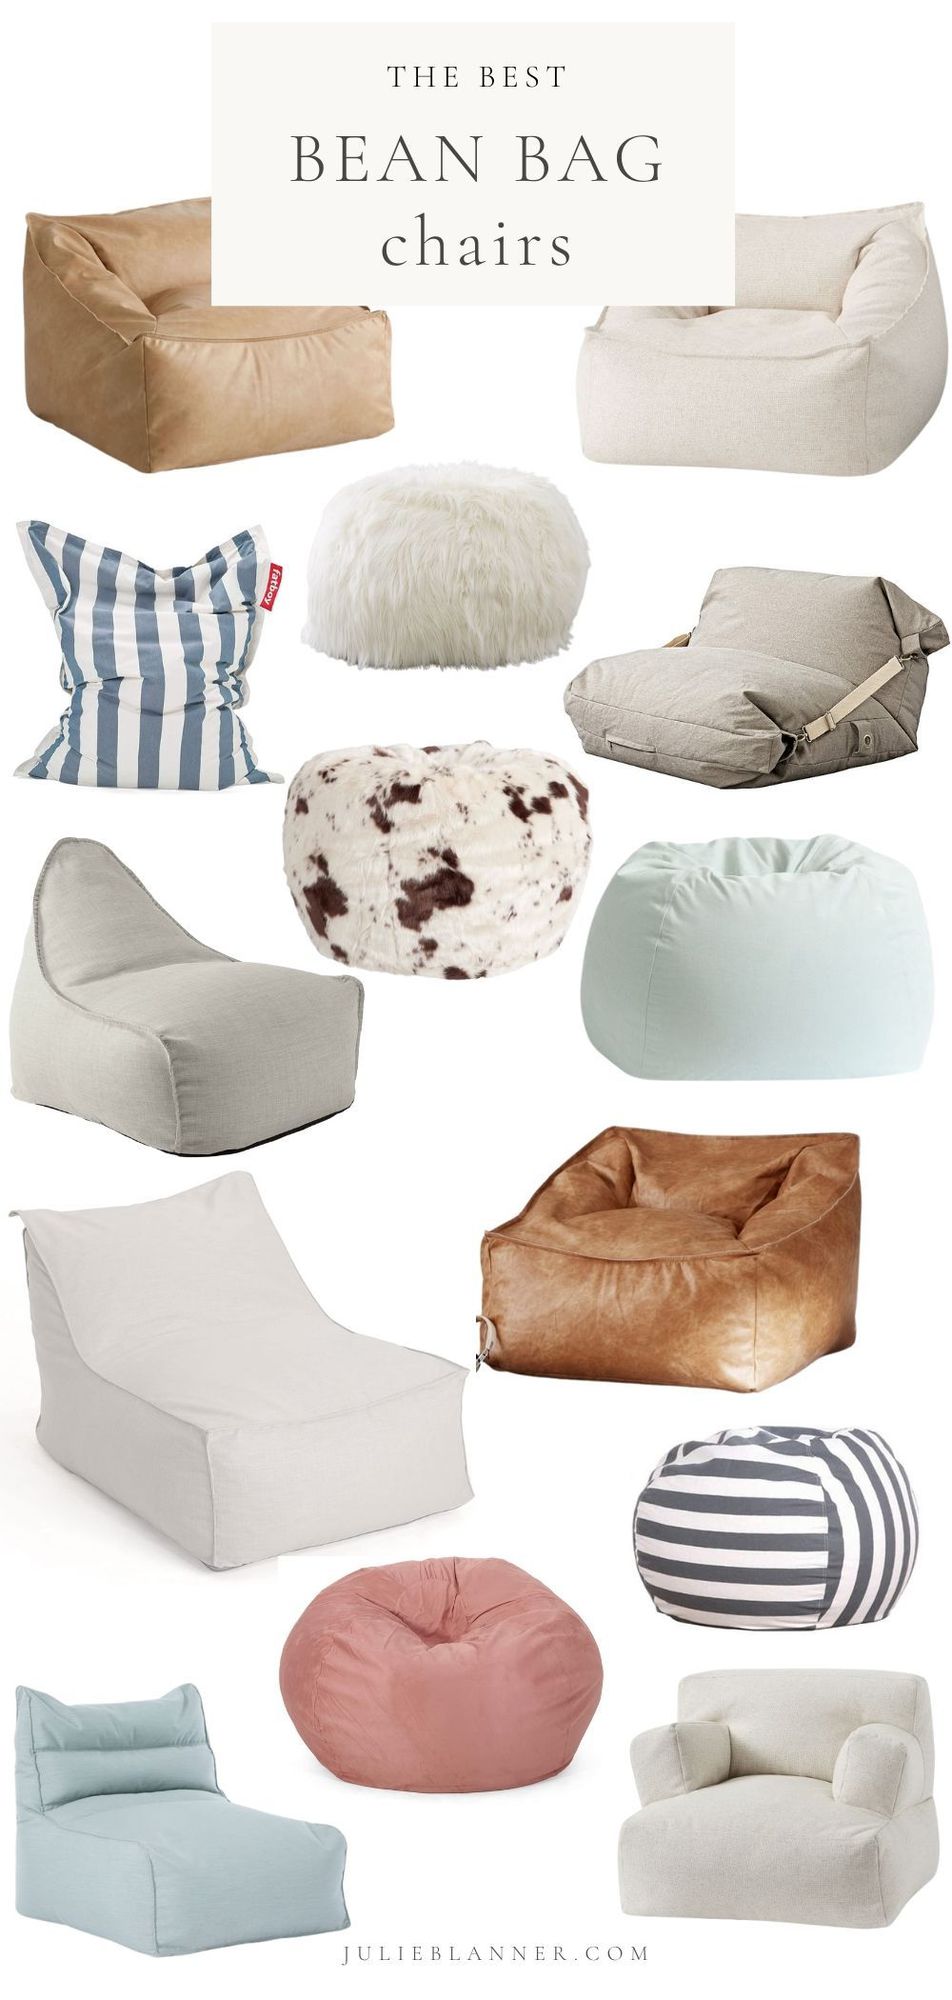 A graphic with a variety of bean bag chairs, the text "best bean bag chairs" at the top.